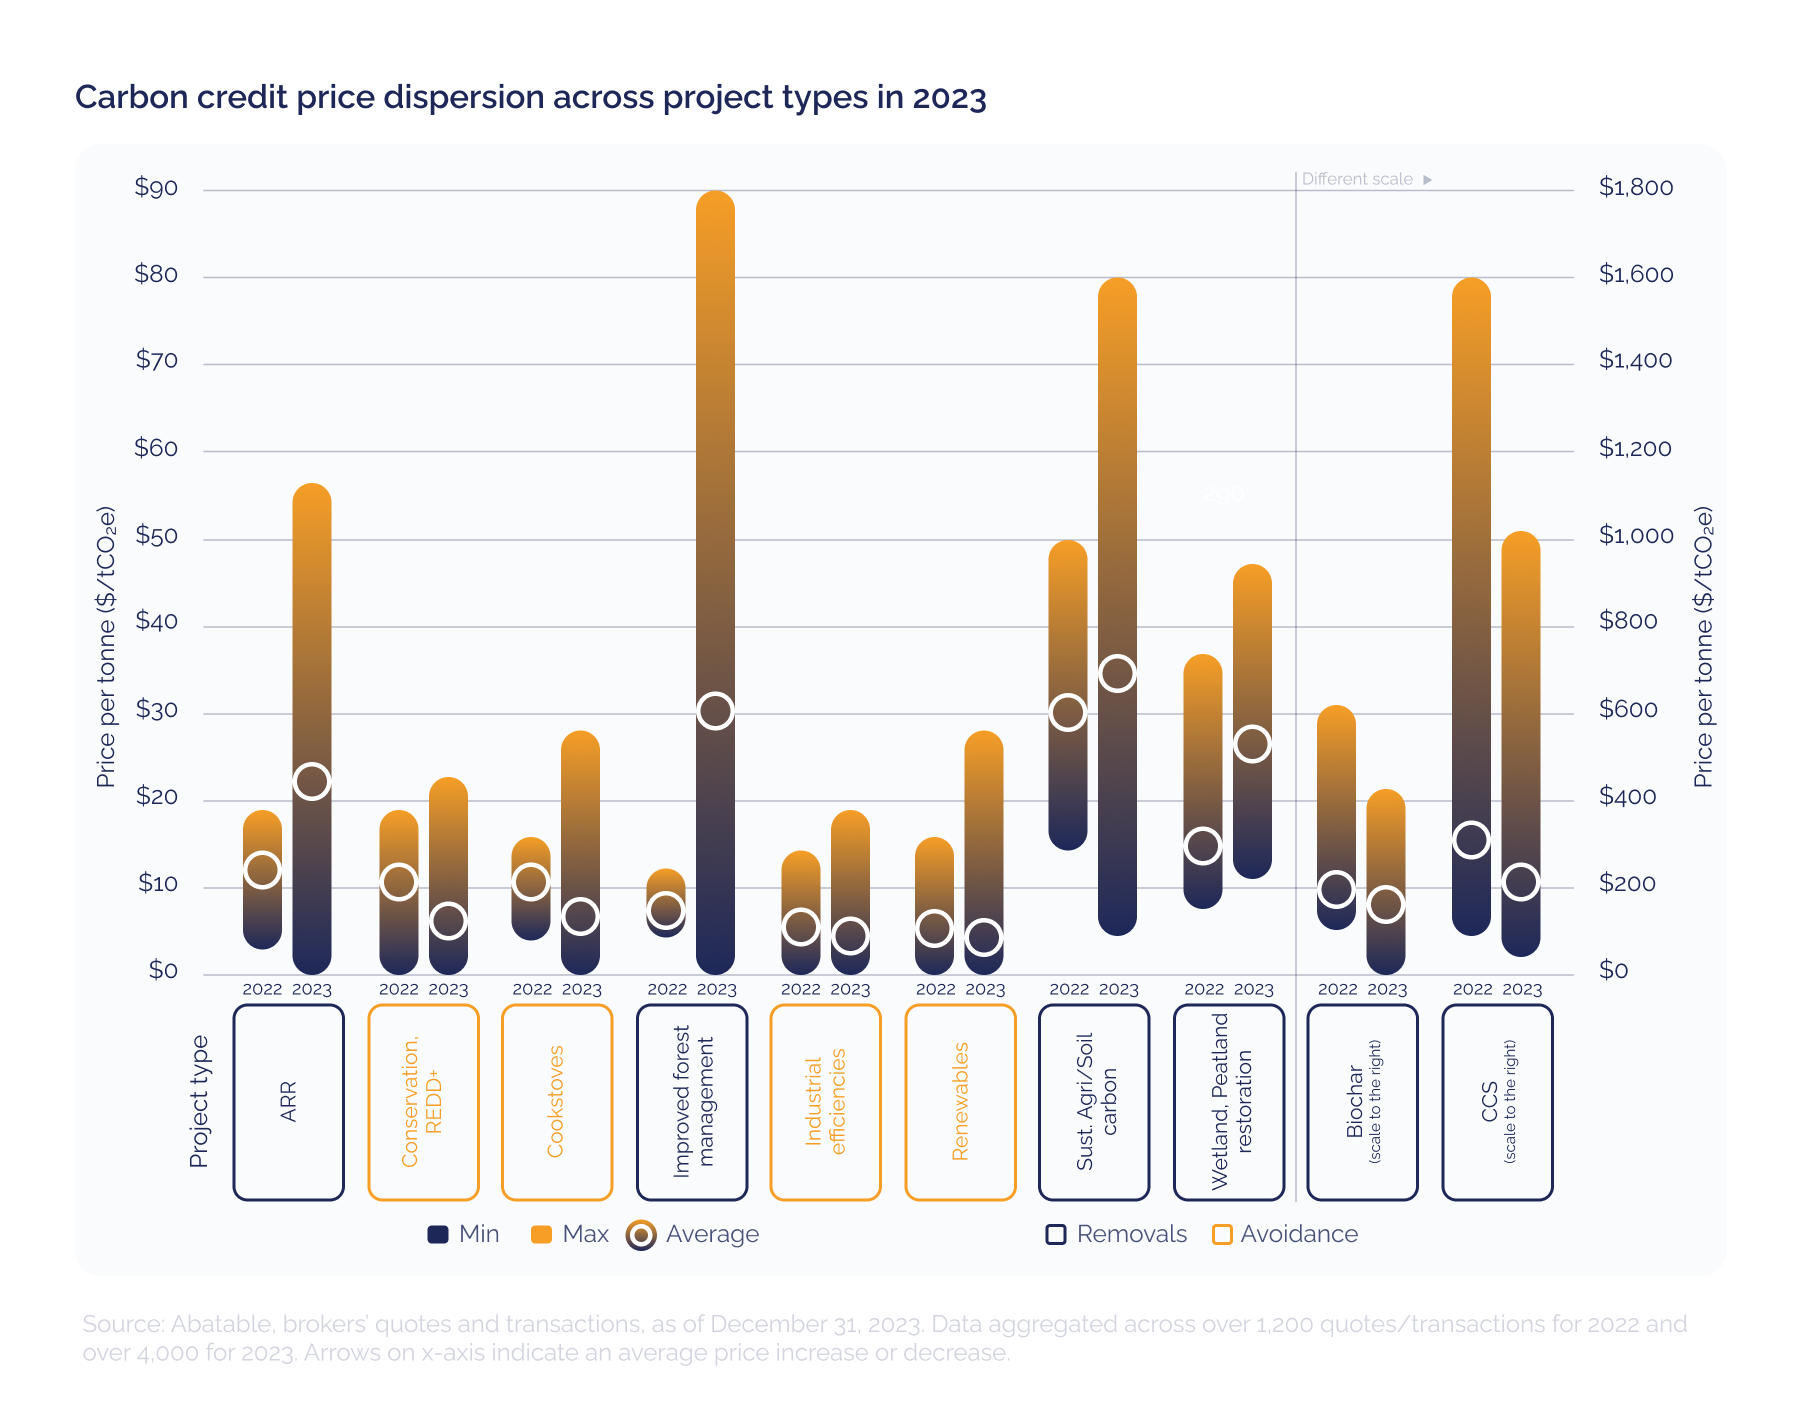 Carbon credit price dispersion across project types in 2023